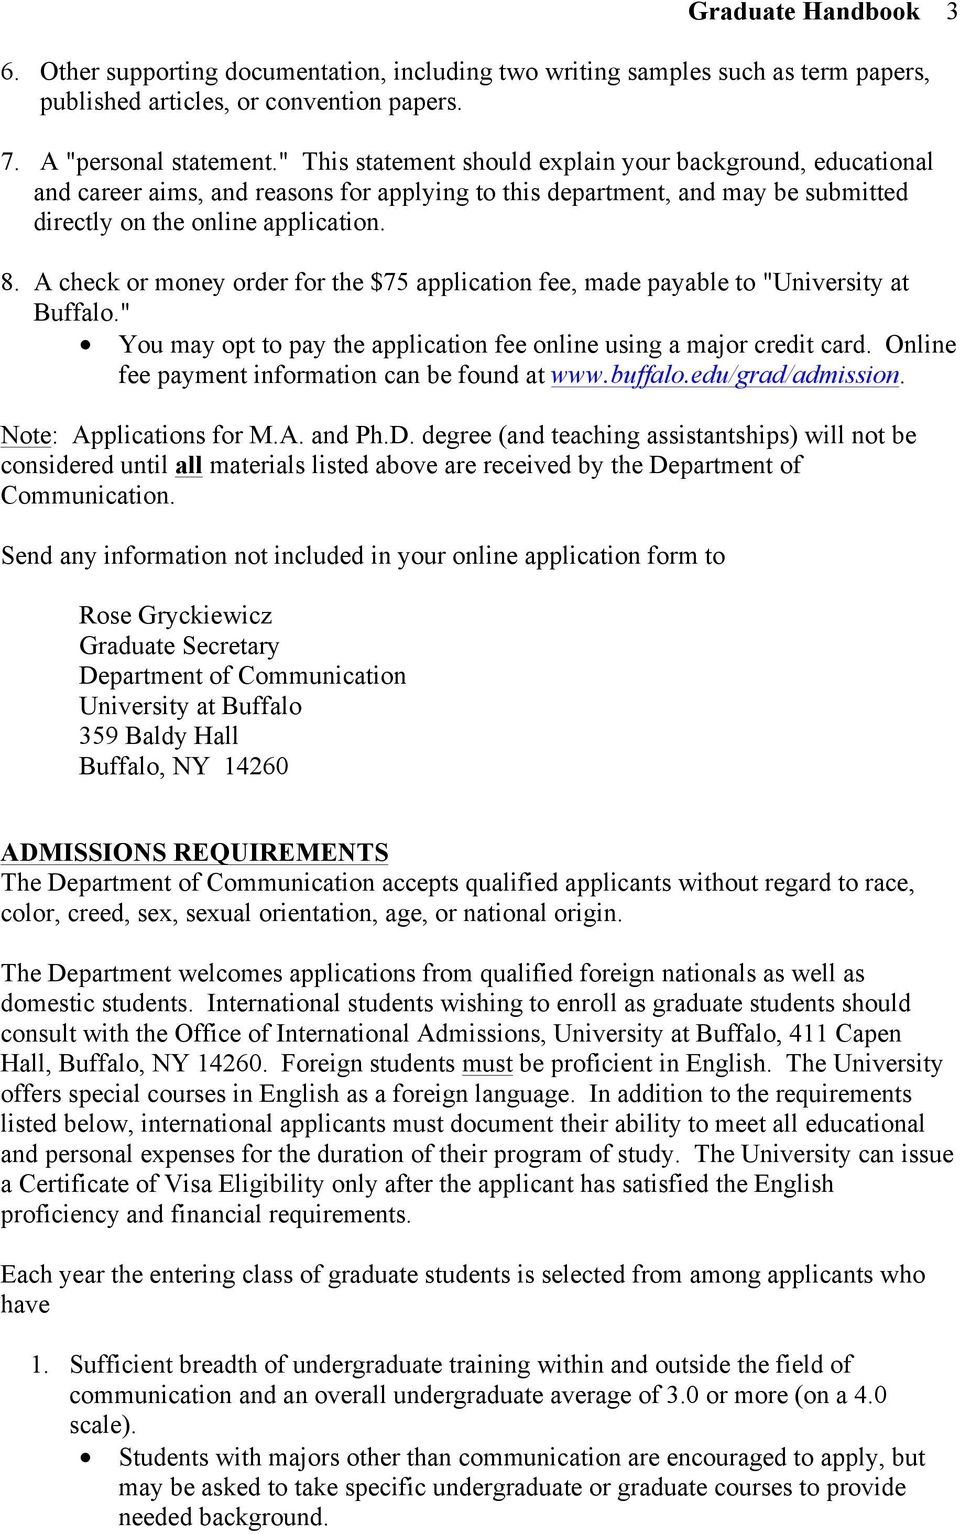 A check or money order for the $75 application fee, made payable to "University at Buffalo." You may opt to pay the application fee online using a major credit card.